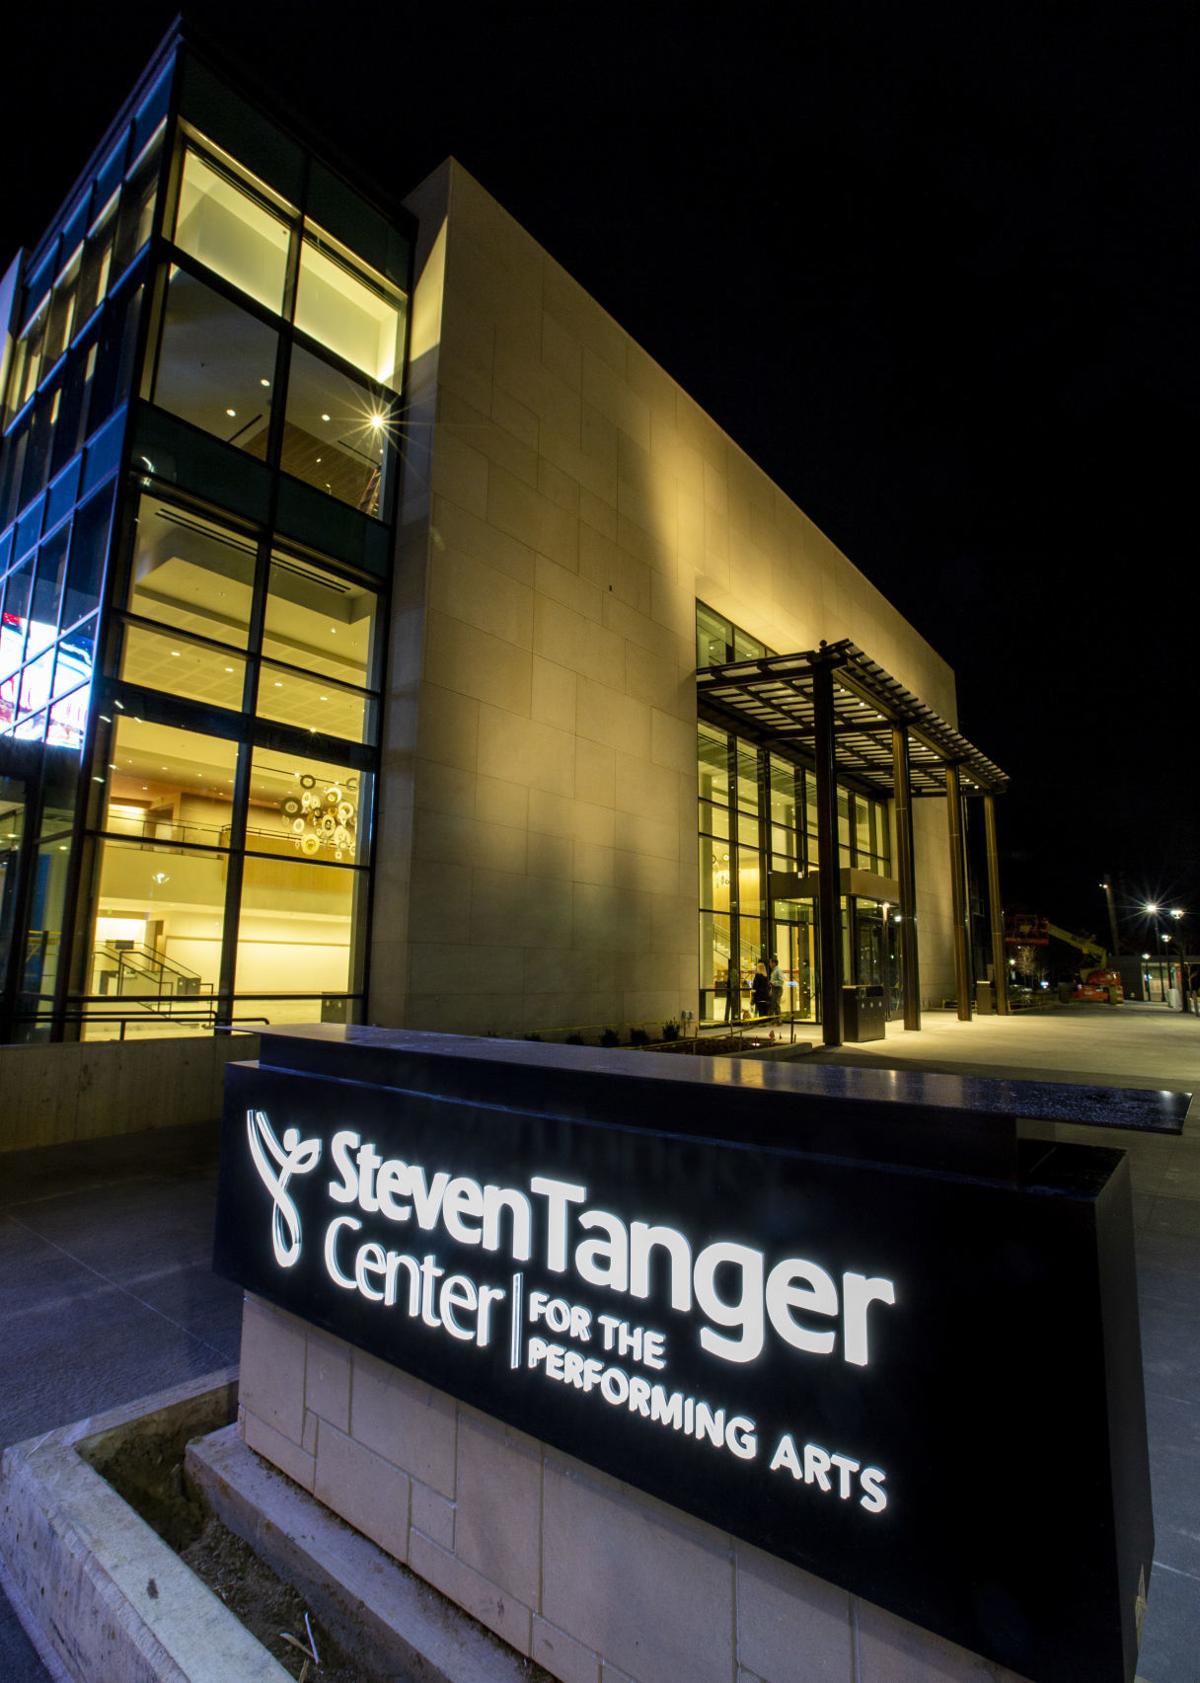 RiverRun and Temple Emanuel to offer free screenings this weekend